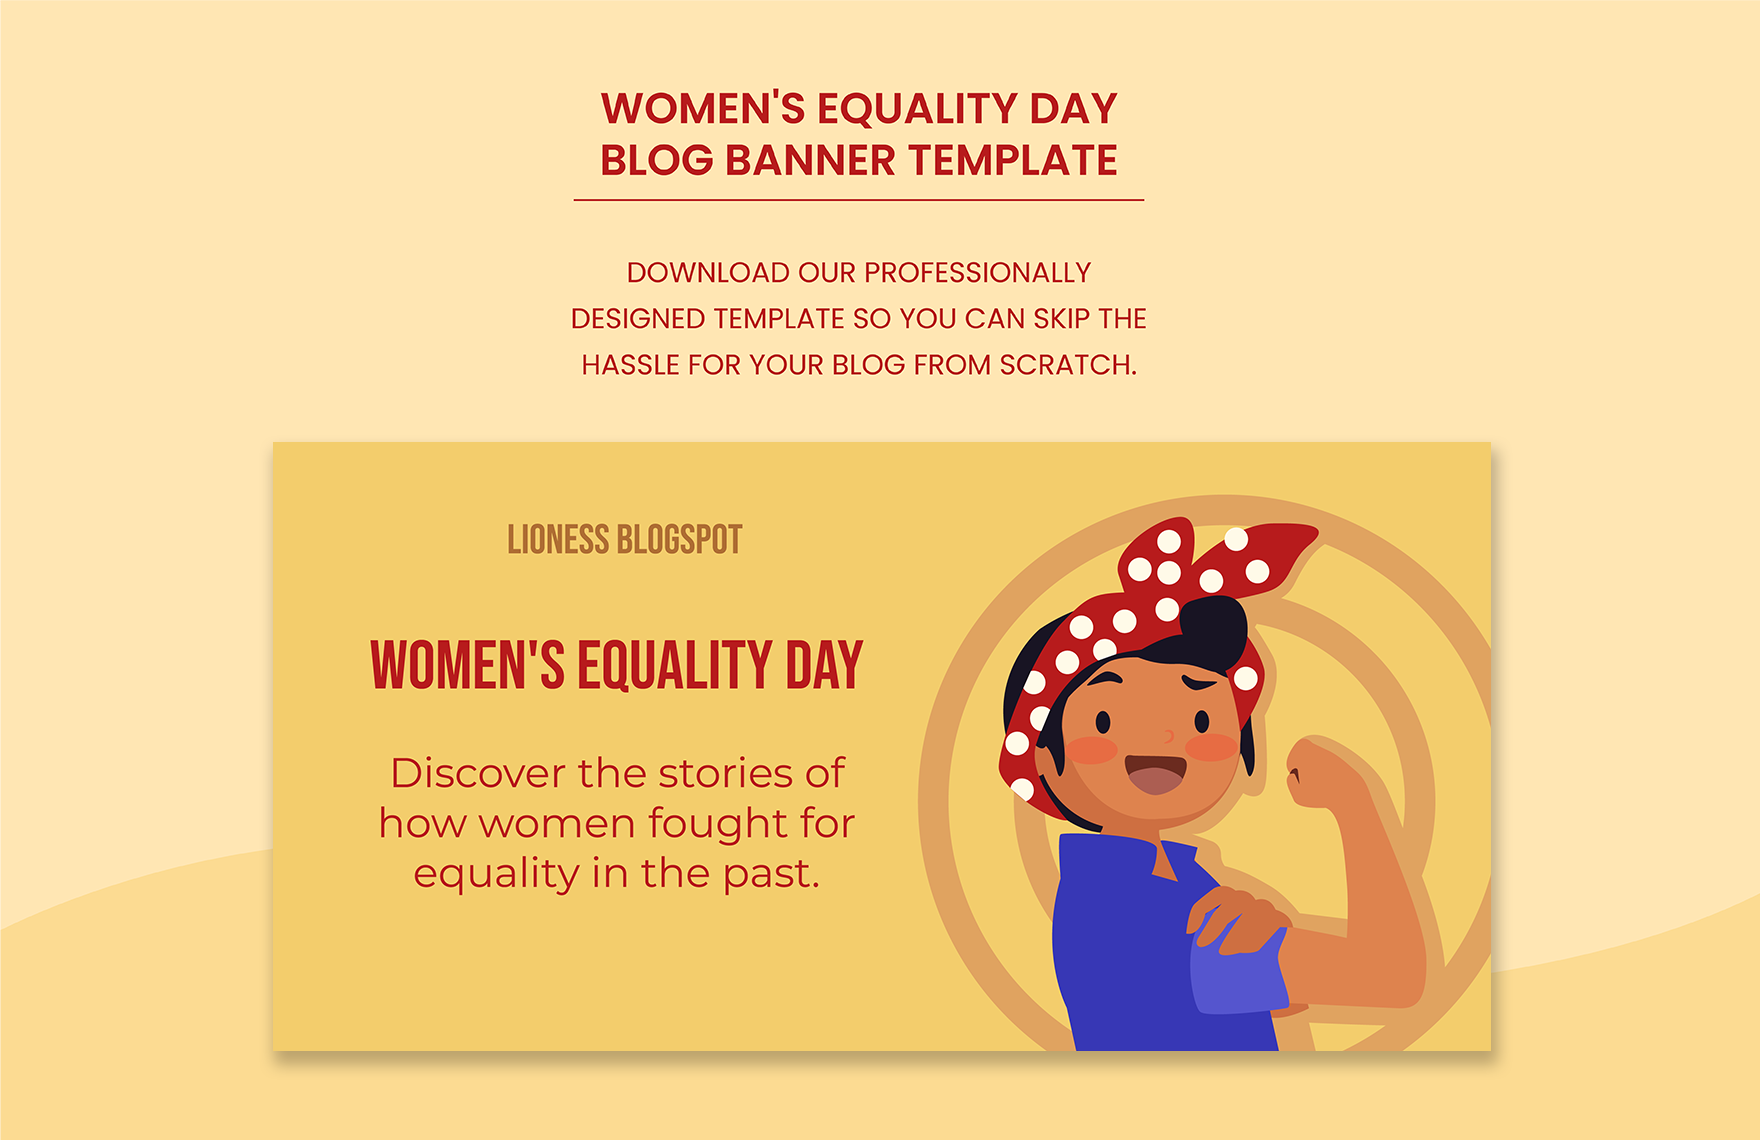 Free Women's Equality Day Blog Banner Template in PDF, Illustrator, SVG, PNG